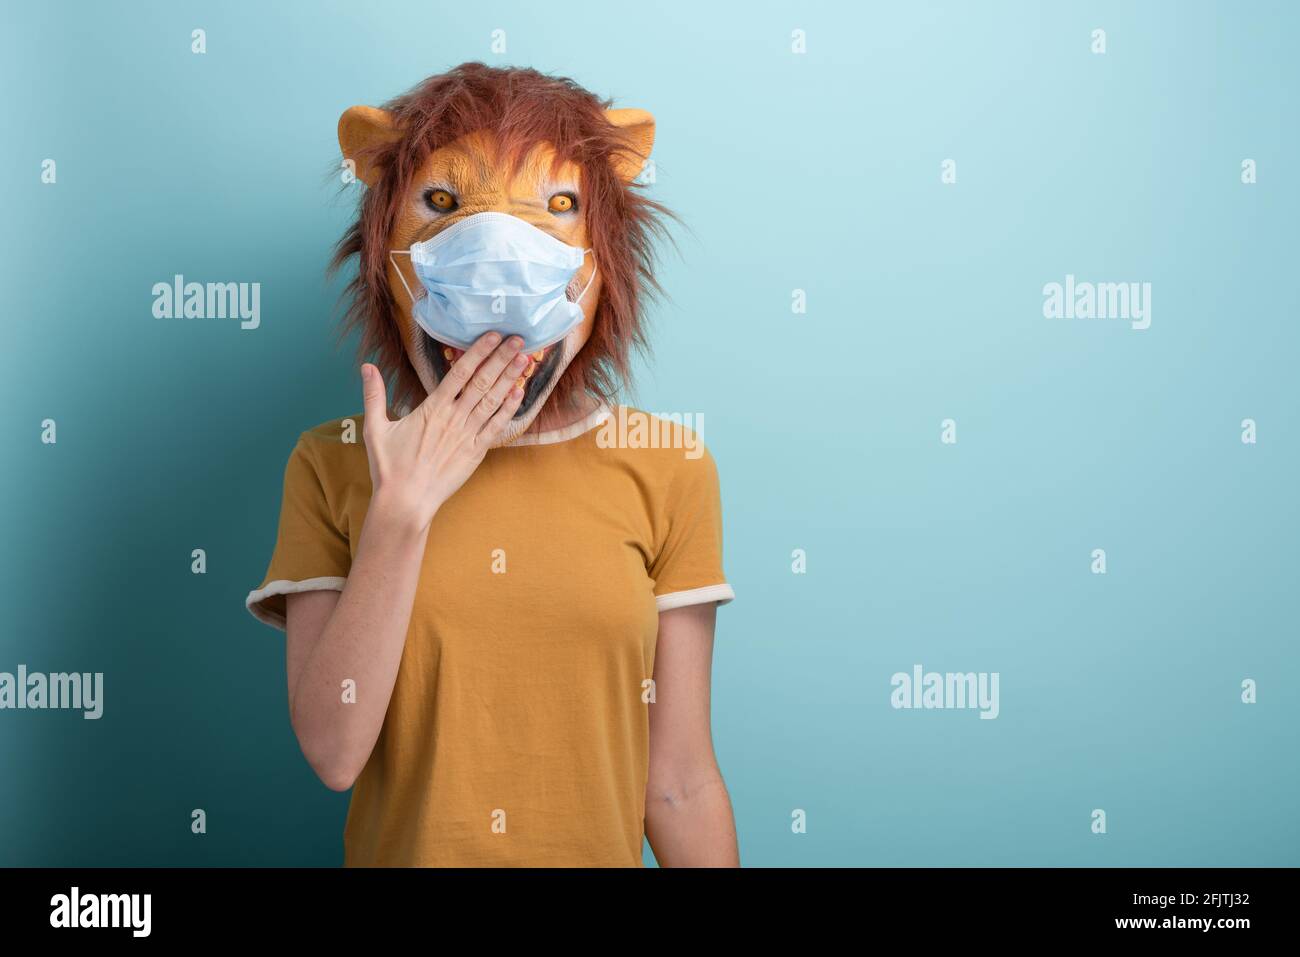 Young woman wearing lion and protection medical mask, covering mouth with hand, isolated on blue background. Stock Photo